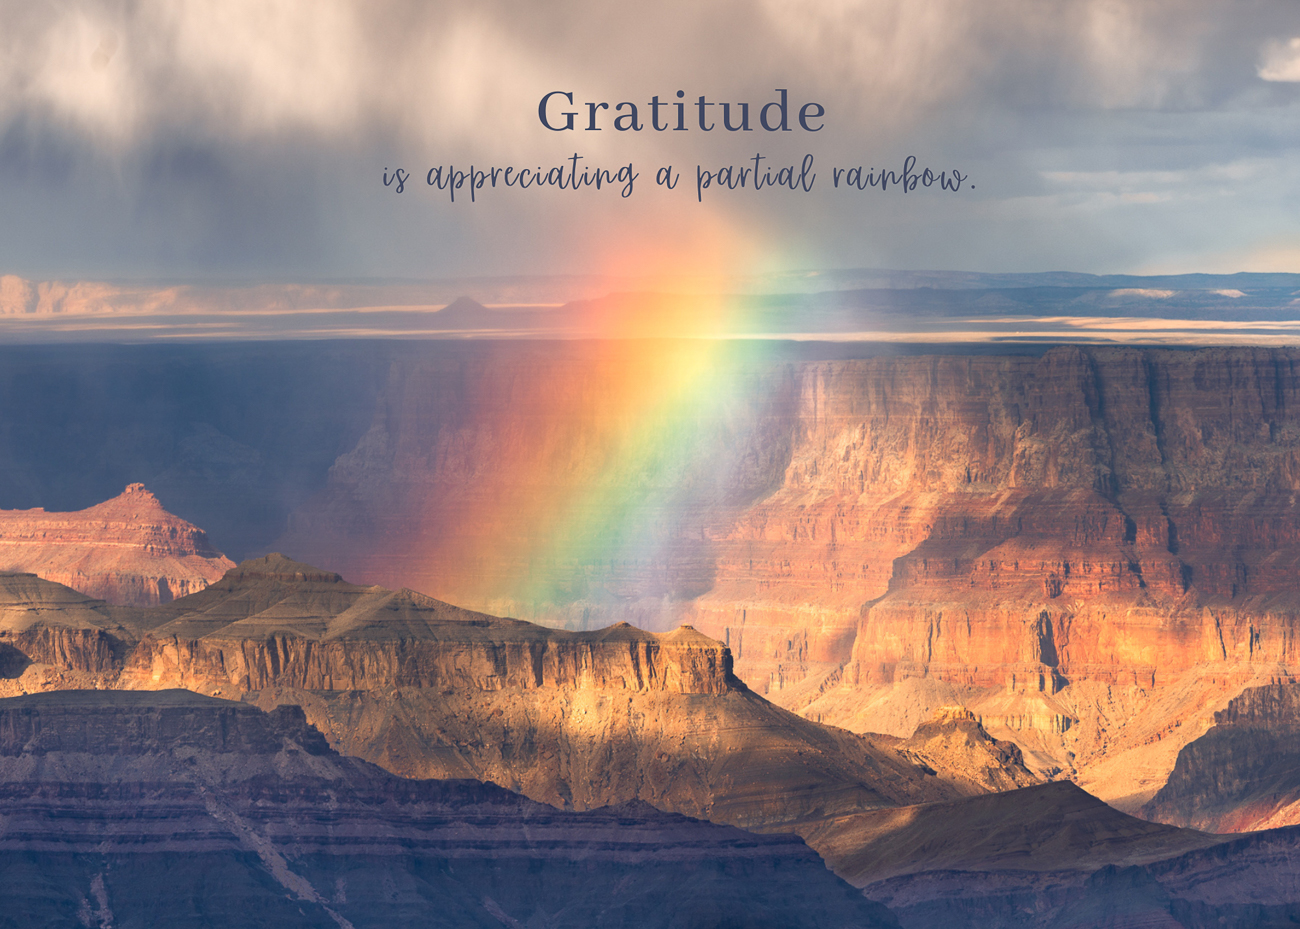 A photo of a rainbow over the Grand Canyon with a quote about gratitude.